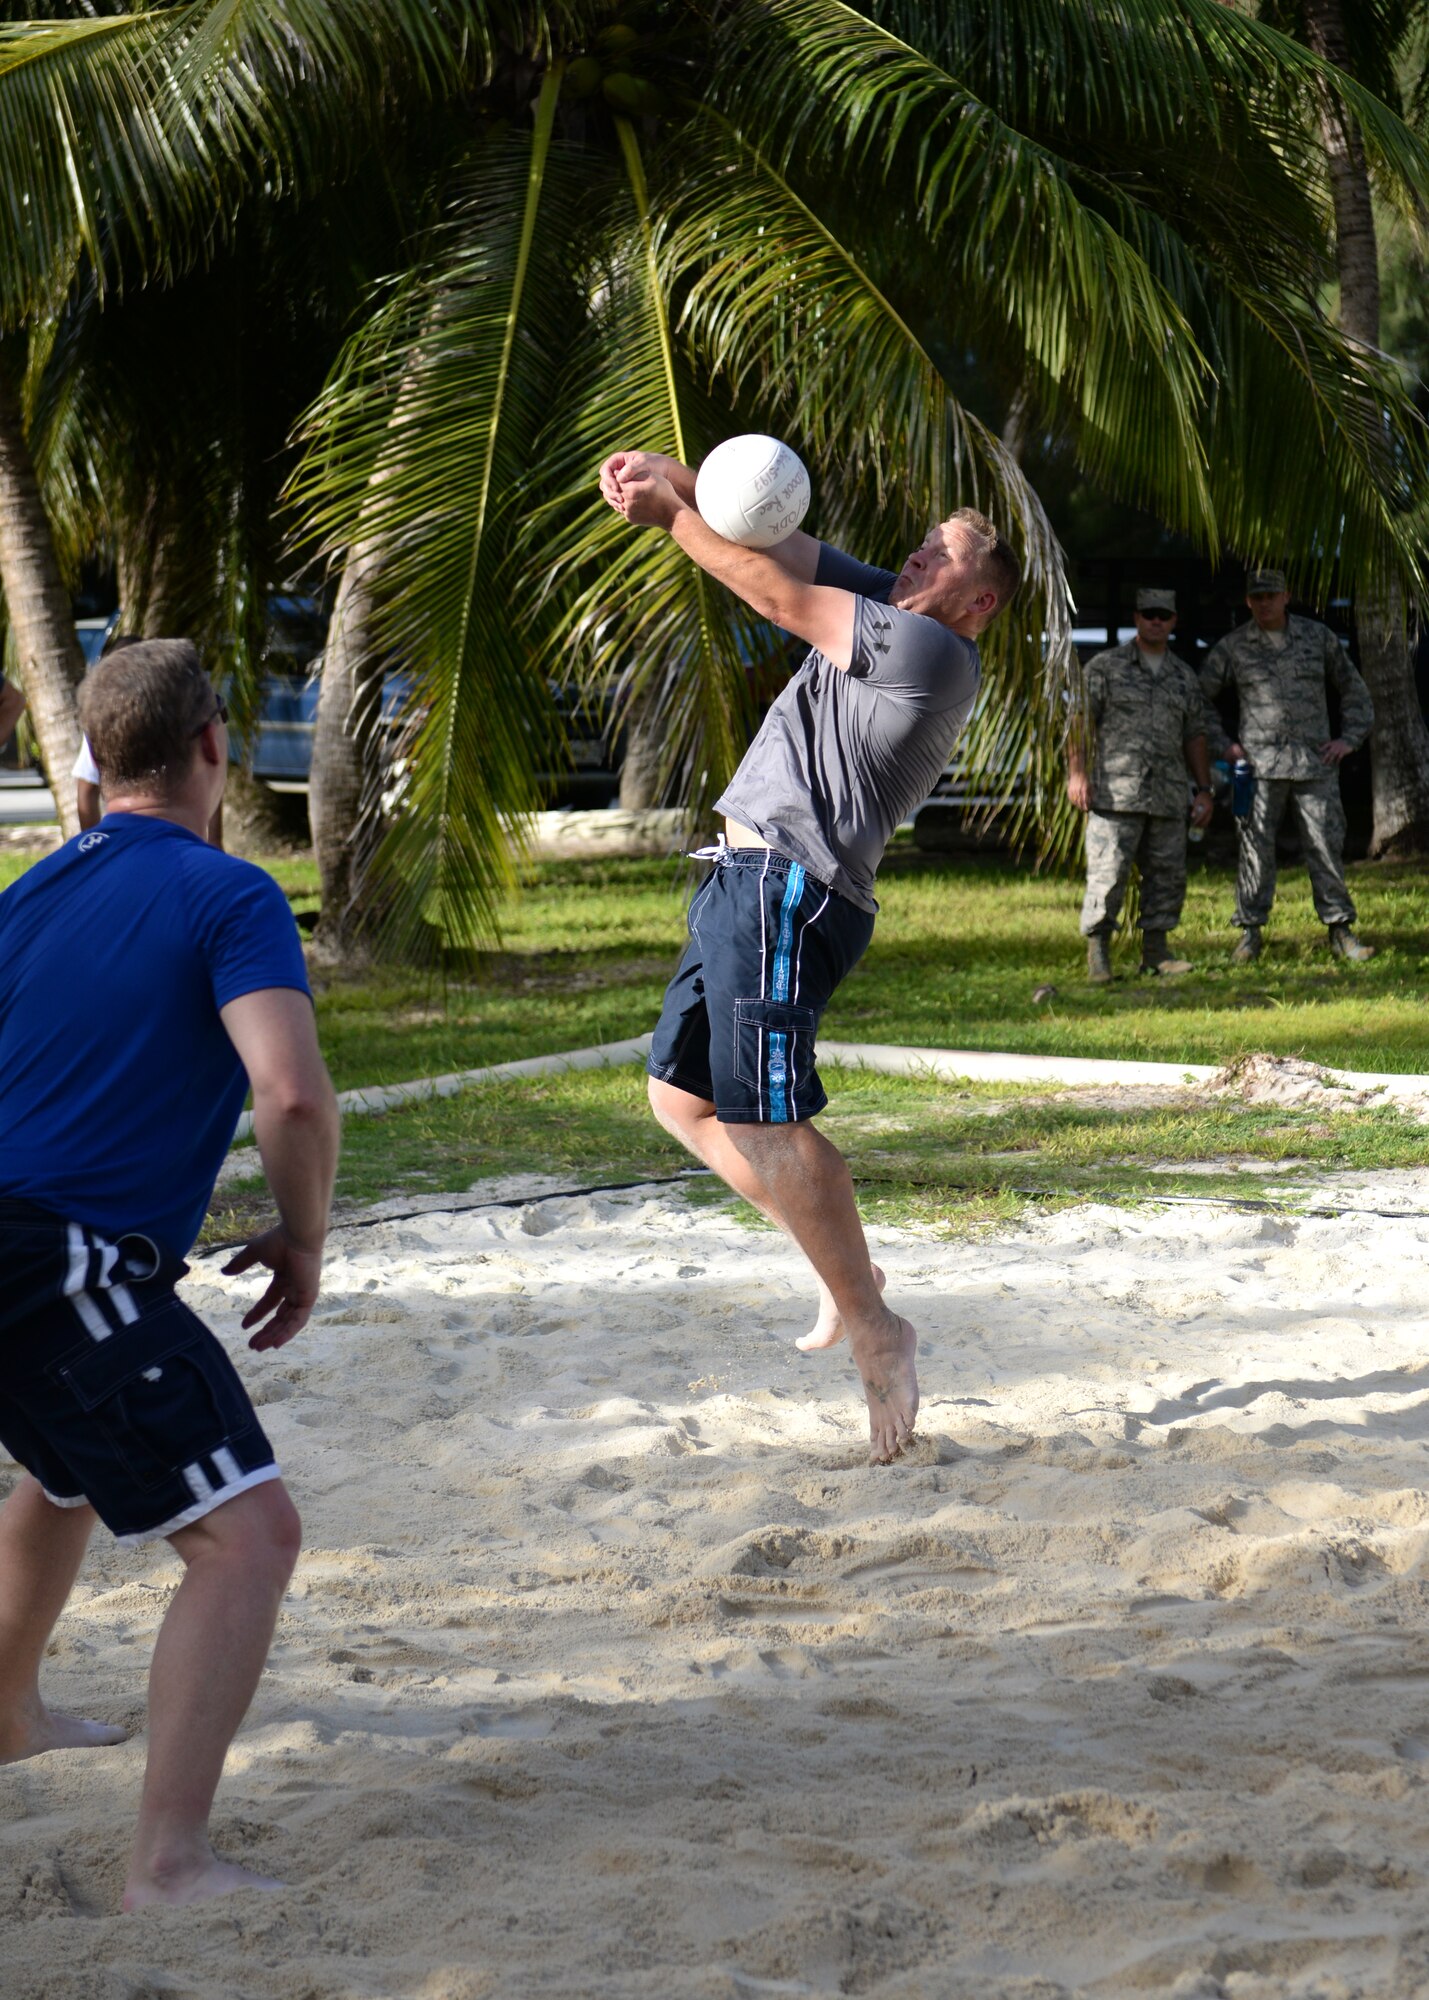 Col. Tyrell Chamberlain, 36th Wing vice commander, sets up a teammate during the Chiefs vs. Eagles volleyball game Oct. 3, 2014, on Andersen Air Force Base, Guam. The Eagles beat the Chiefs in a  best two out of three tournament style volleyball game and secured possession of the trophy until the next event. (U.S. Air Force photo by Senior Airman Katrina M. Brisbin/Released)